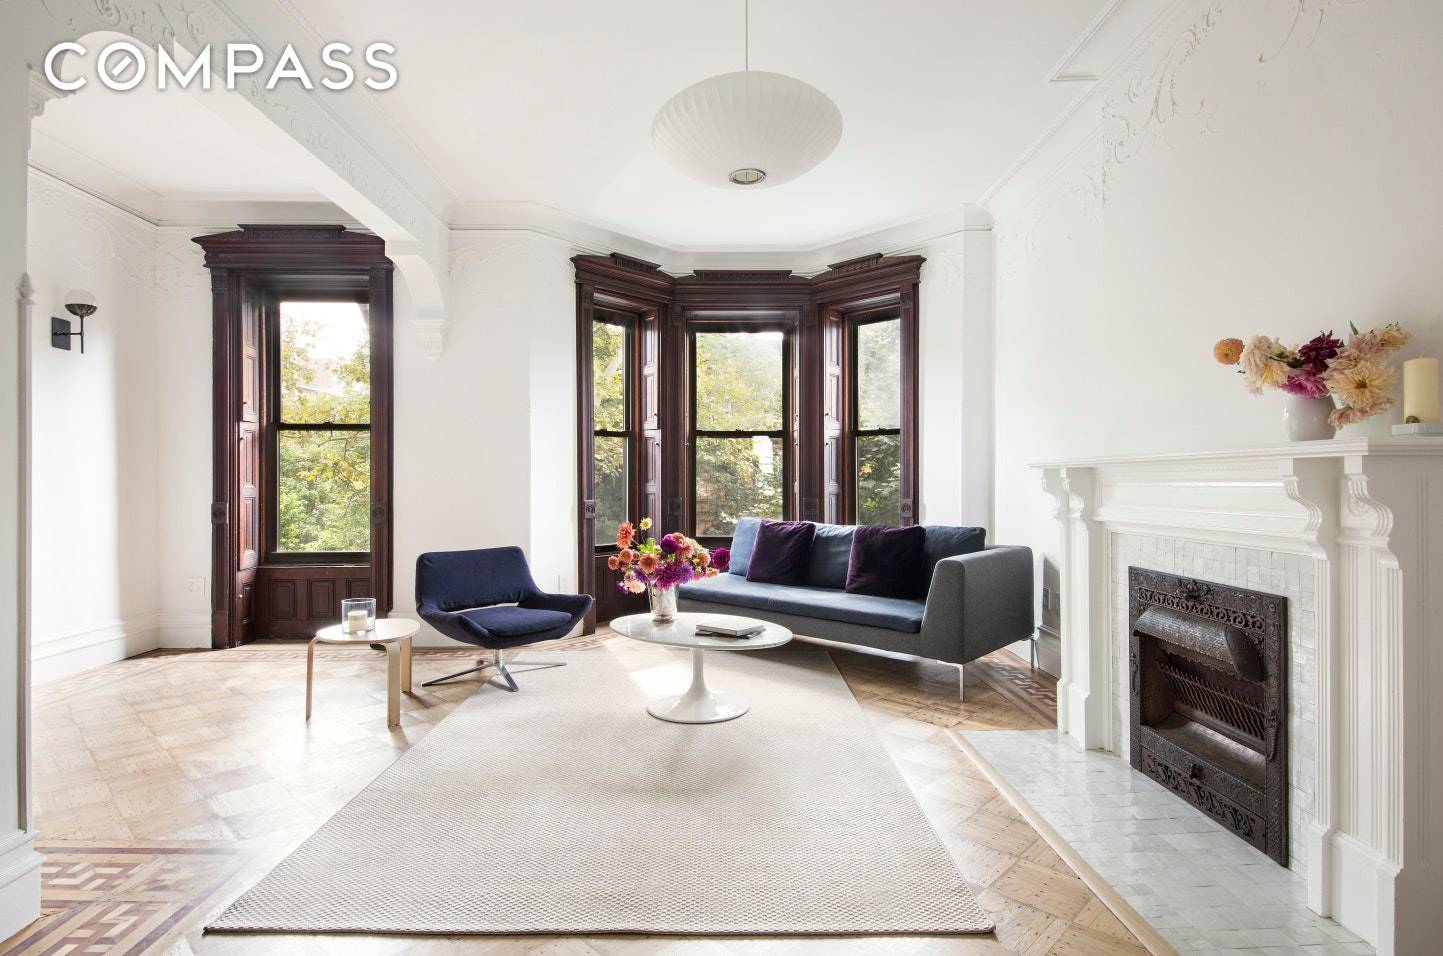 503 1st is a stately brownstone located on one of the most sought after blocks in Park Slope's historic district just one block away from Prospect Park and built in ...